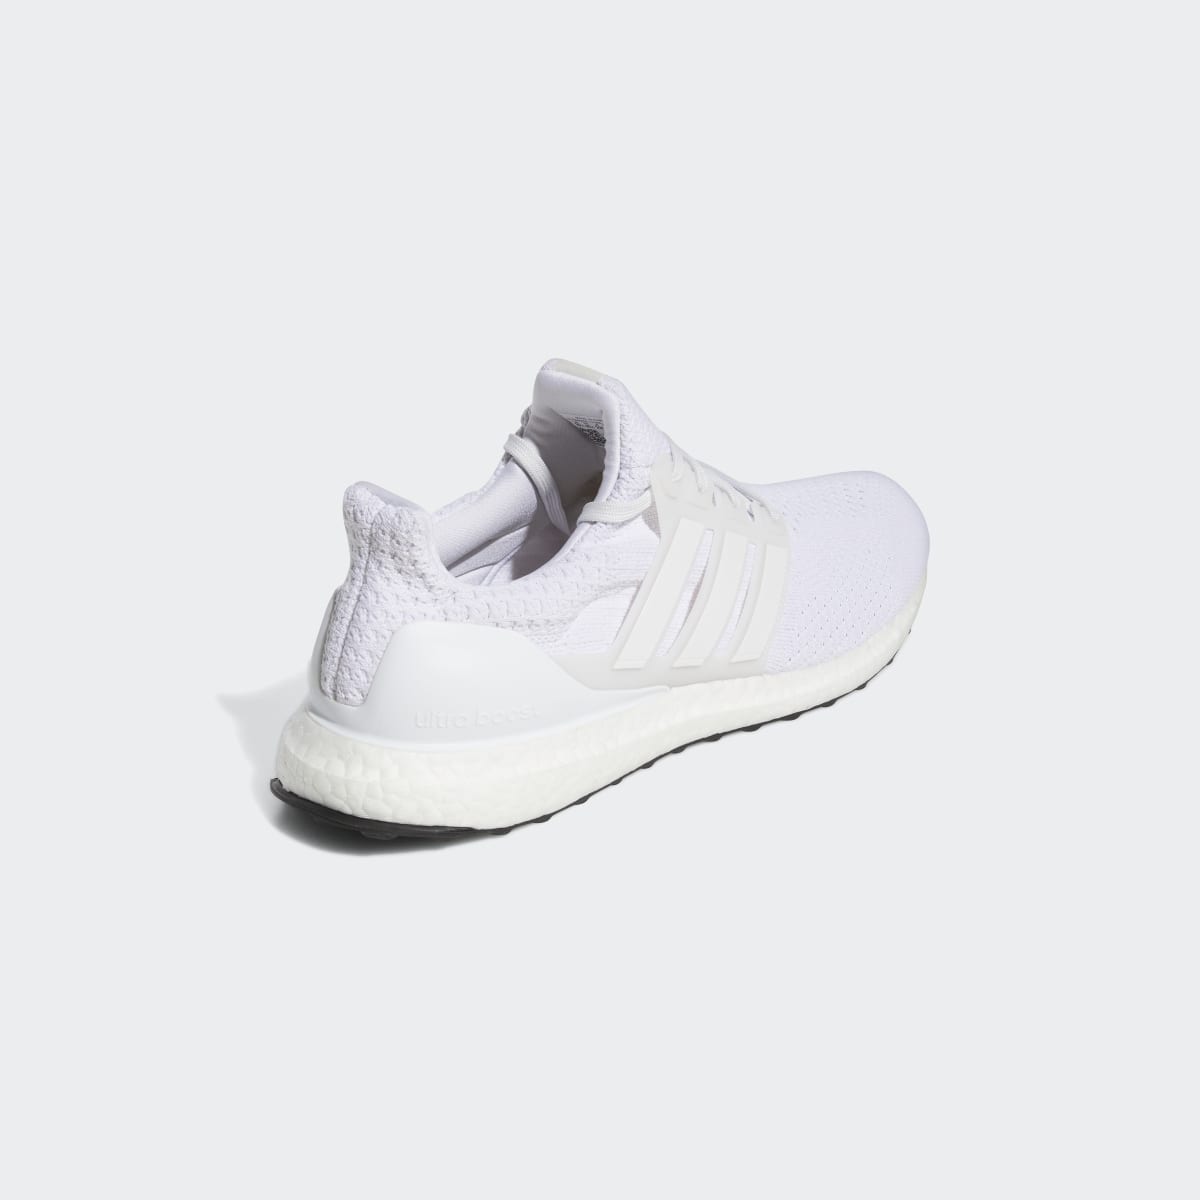 Adidas Ultraboost DNA 5.0 Shoes. 7